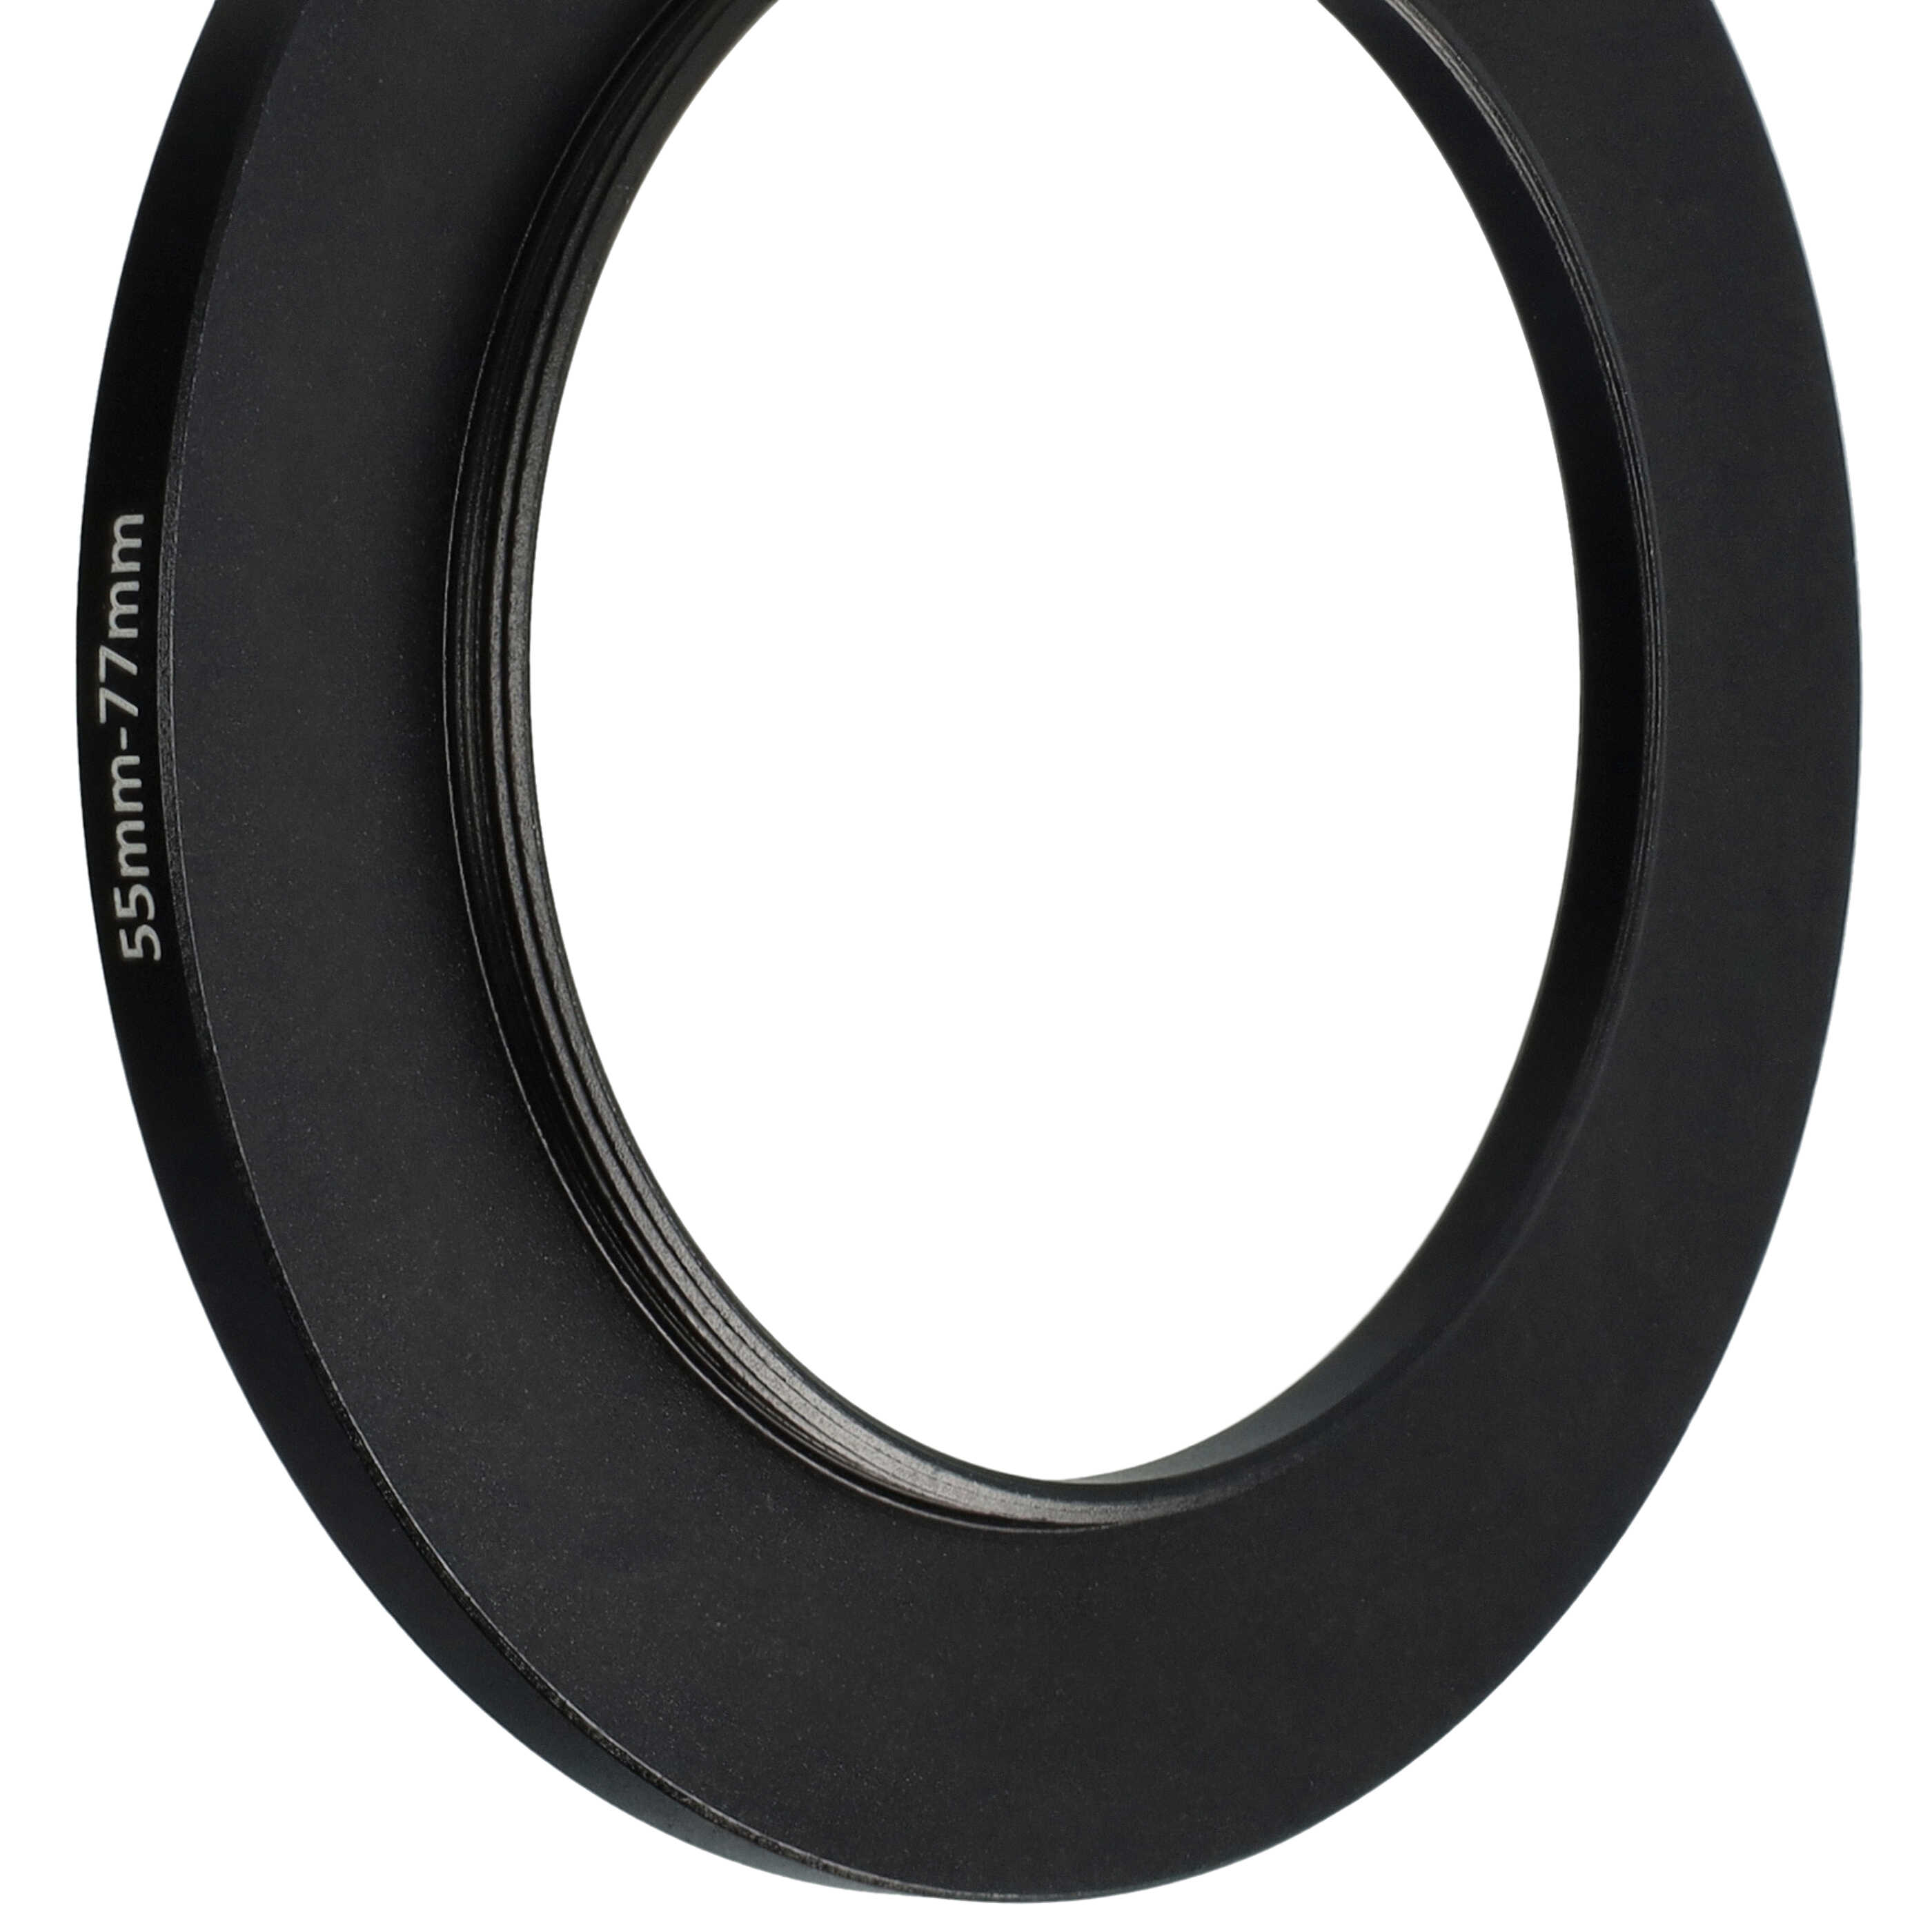 Step-Up Ring Adapter of 55 mm to 77 mmfor various Camera Lens - Filter Adapter